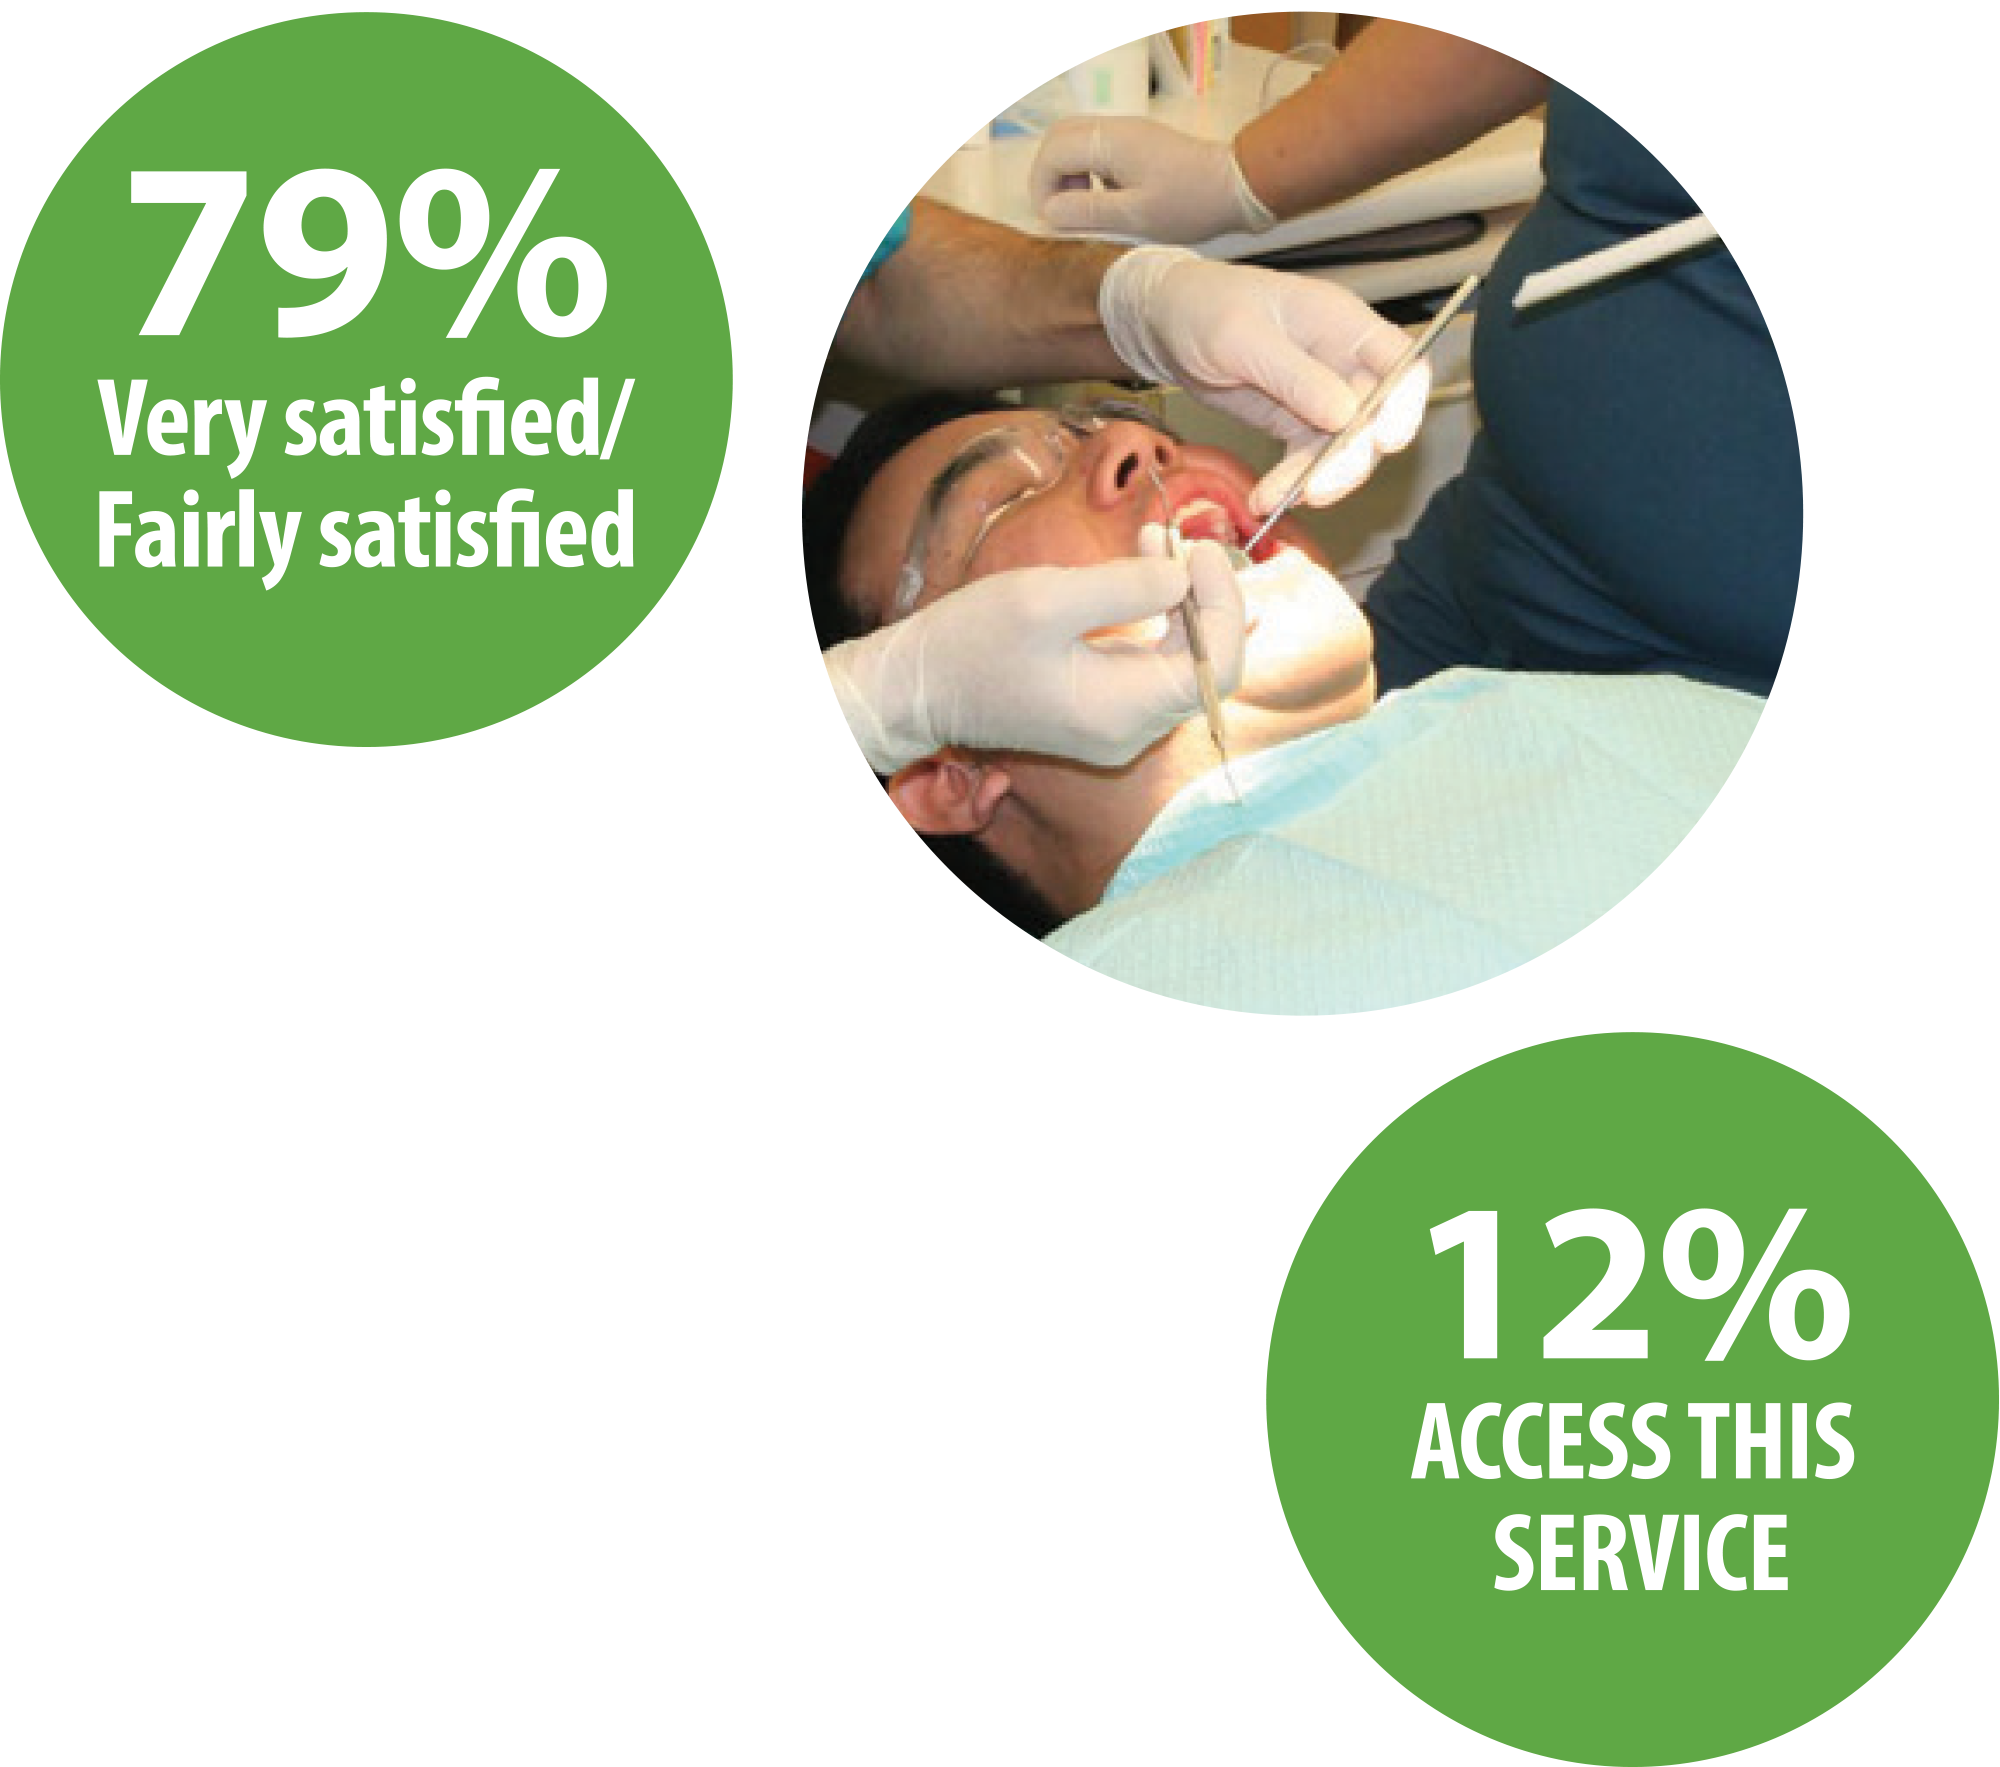 79% Very satisfied/Fairly satisfied | 12% Access this service